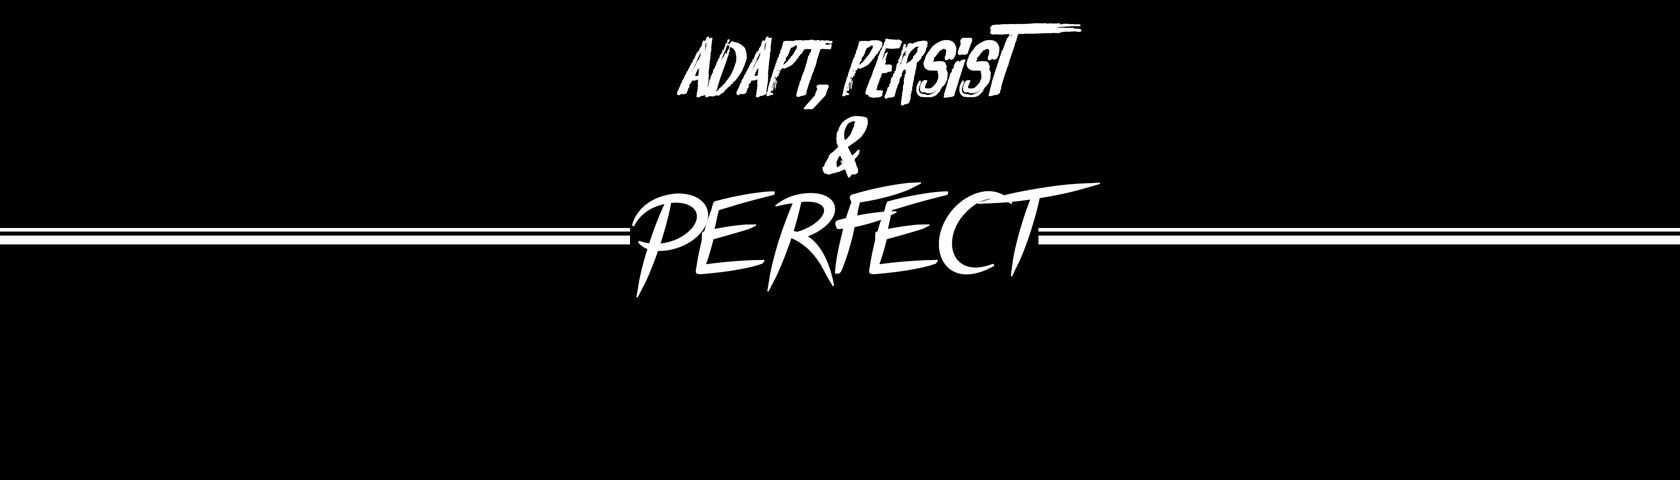 Adapt Persist Perfect Image Wallpaperfusion By Binary